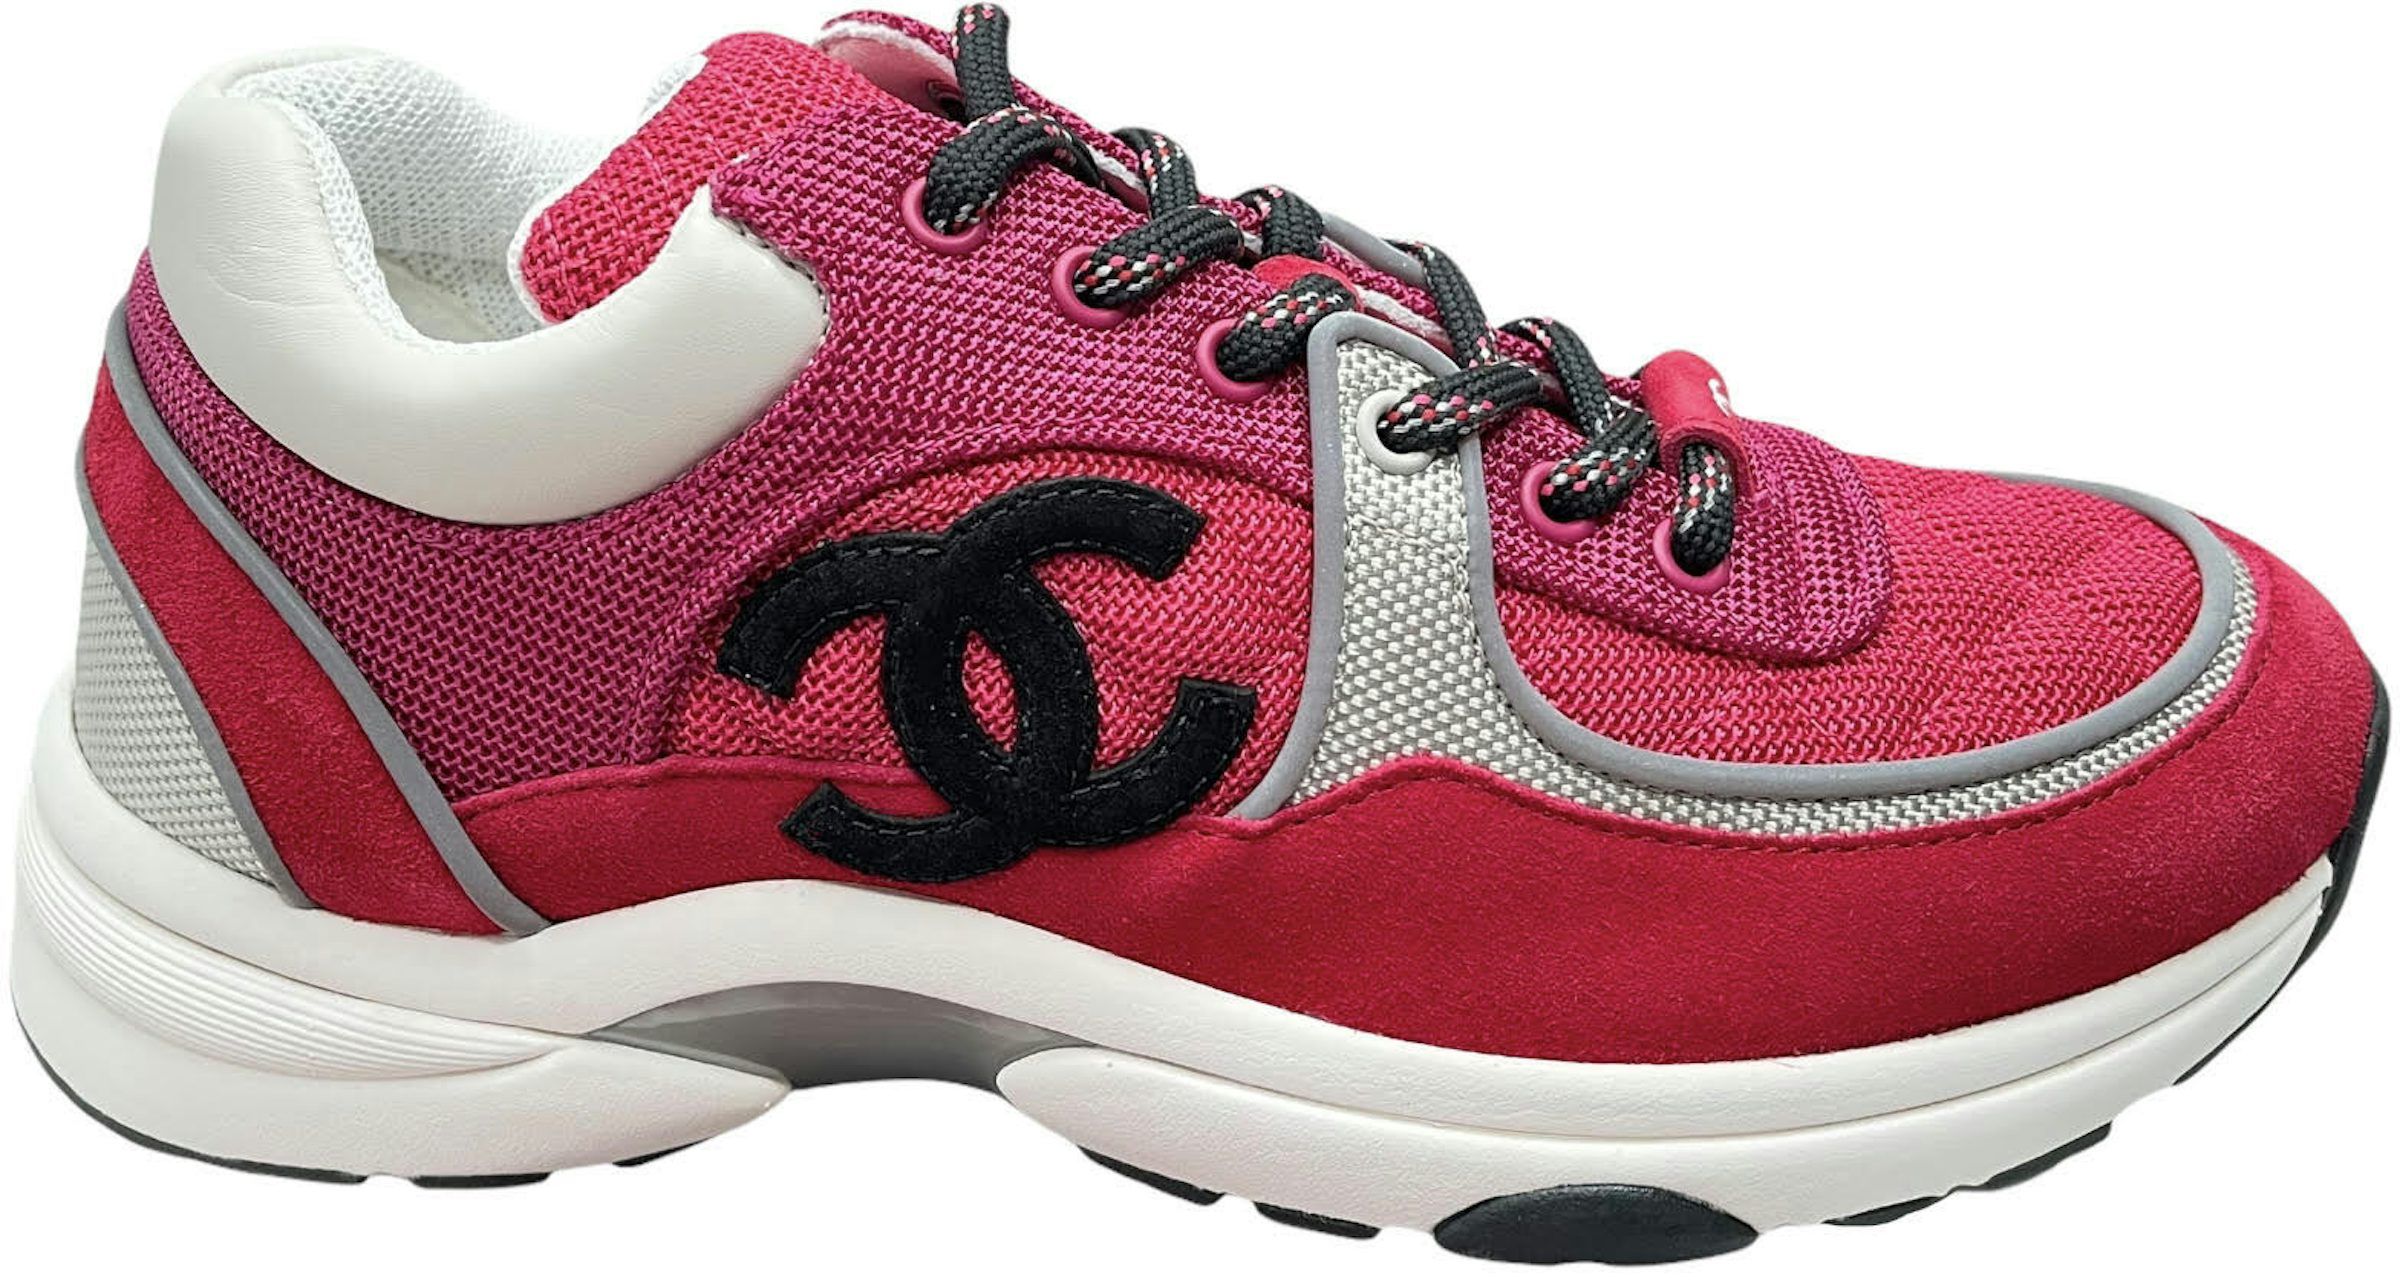 CHANEL 38.5 Salmon Pink Canvas Leather Lace Up Sneakers Tennis Shoes  Trainer NEW